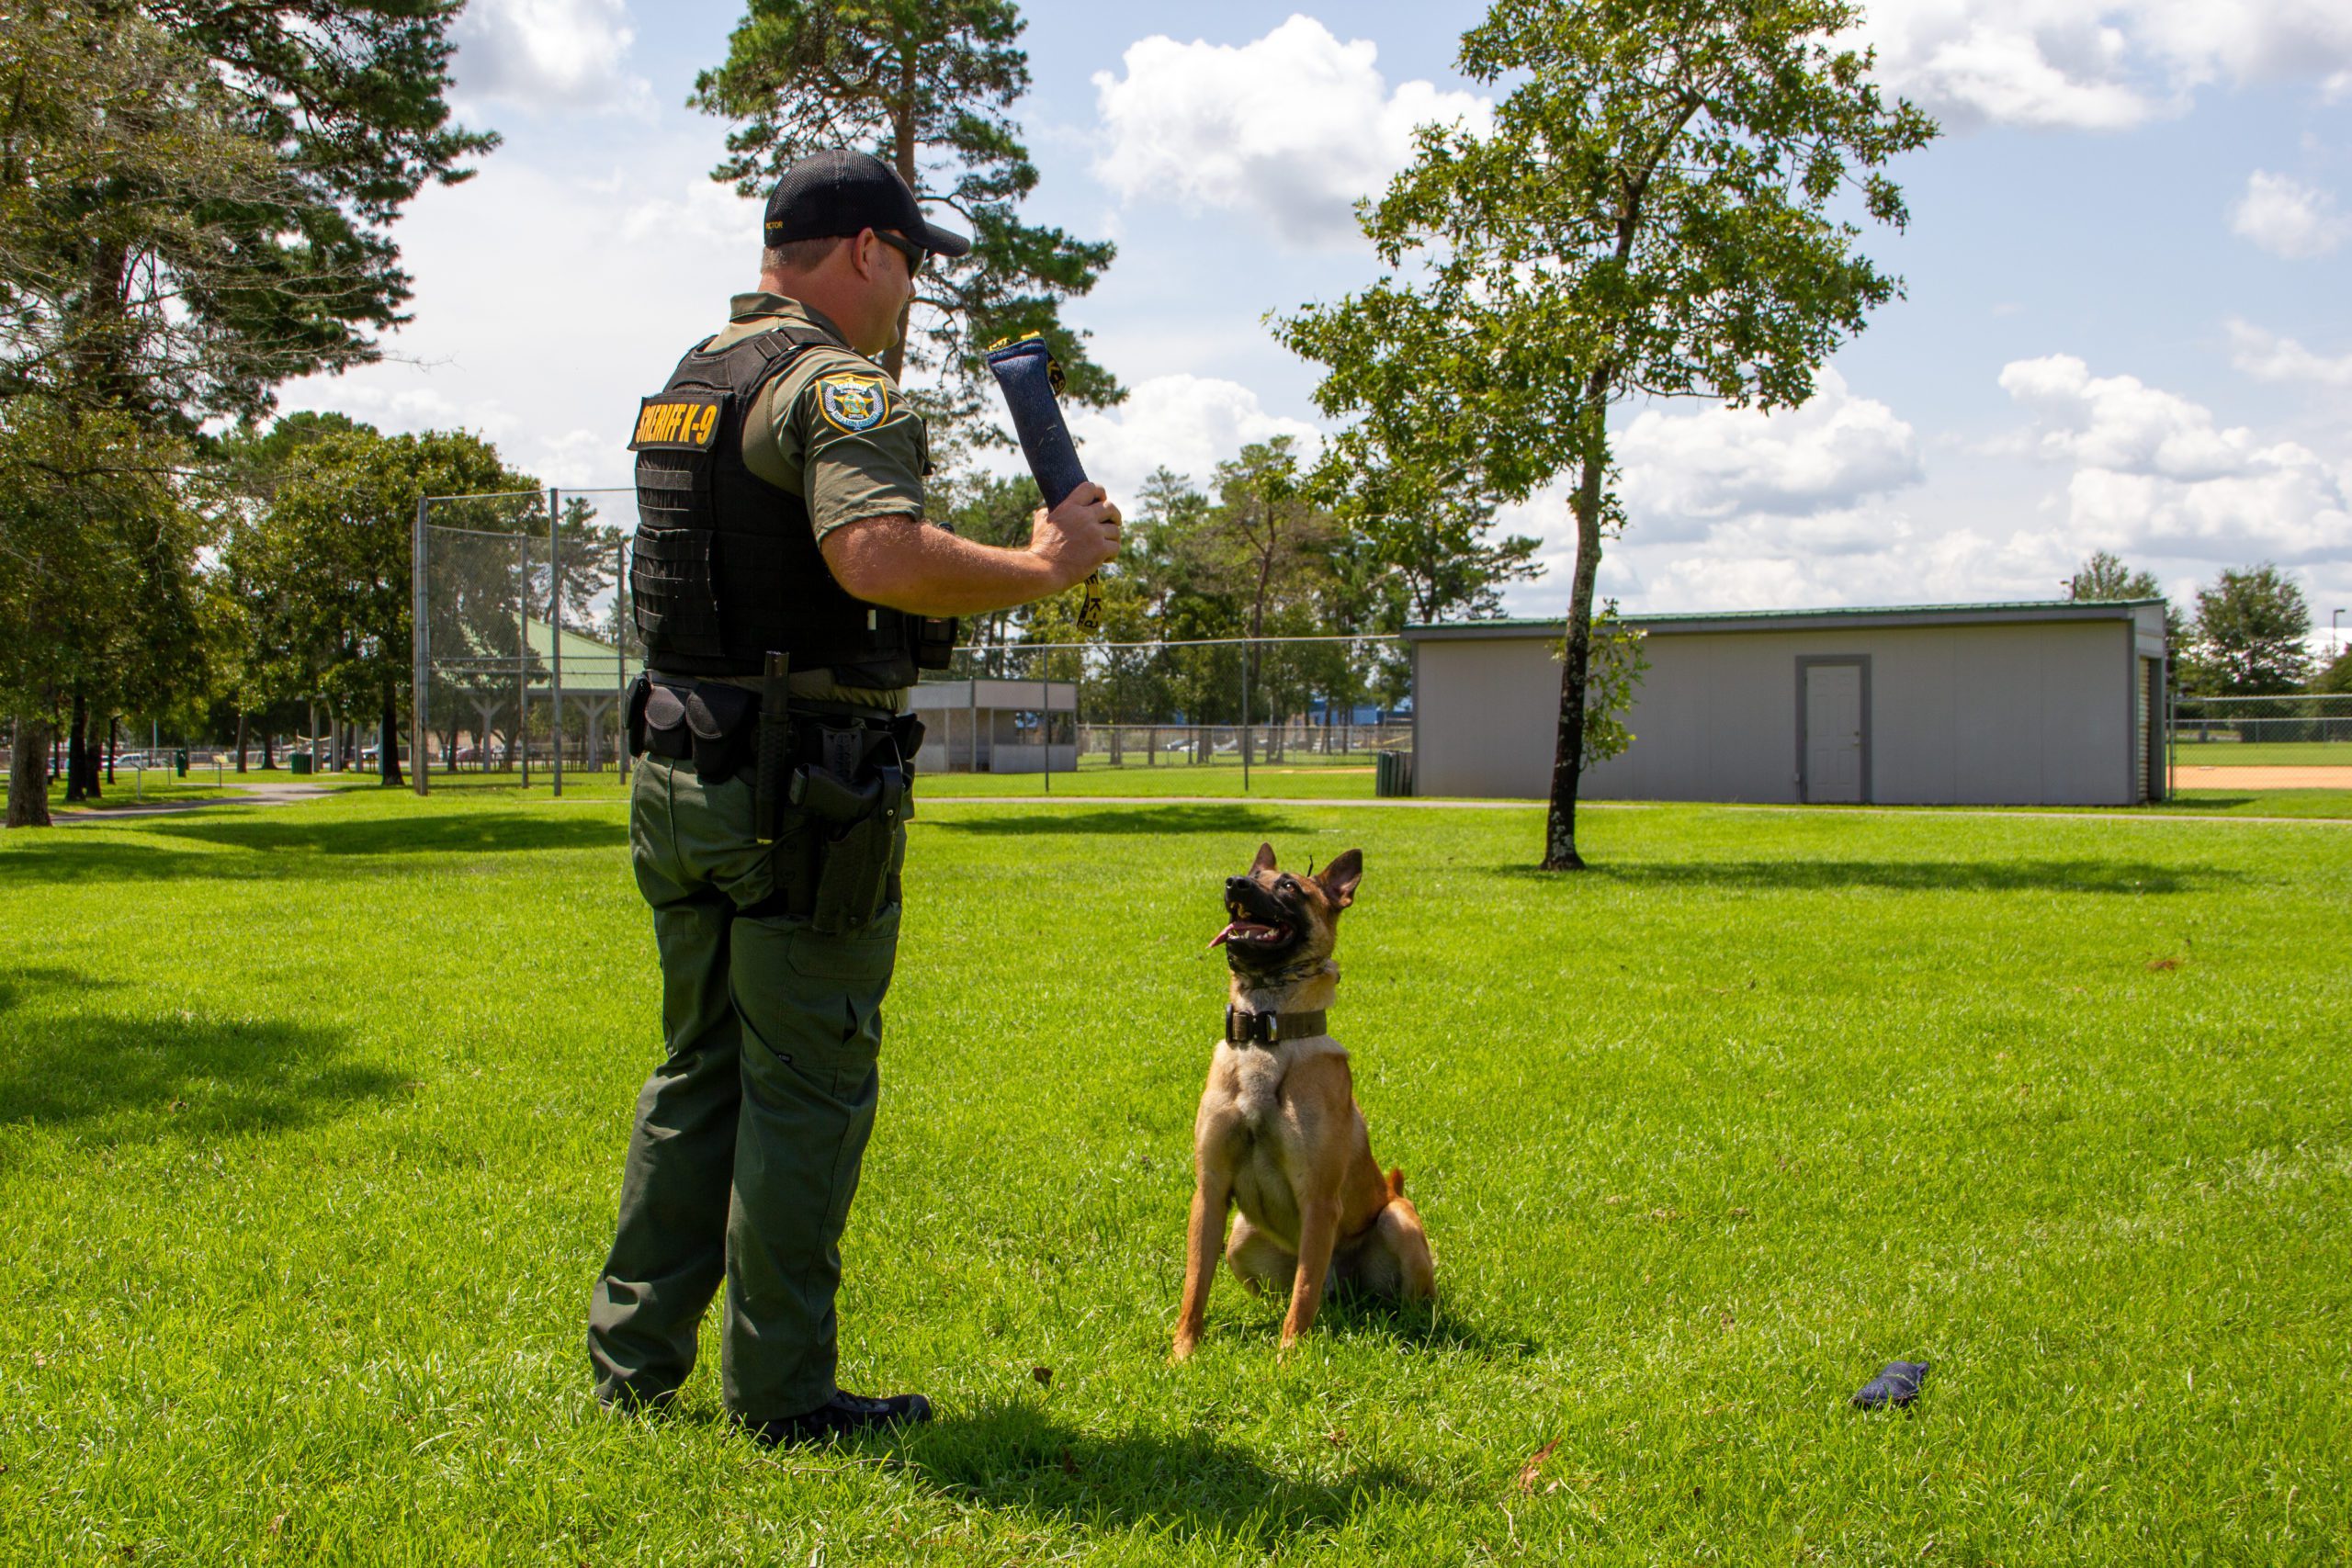 The Bond at Its Best: Getting to Know Walton County, Florida’s K-9 Teams